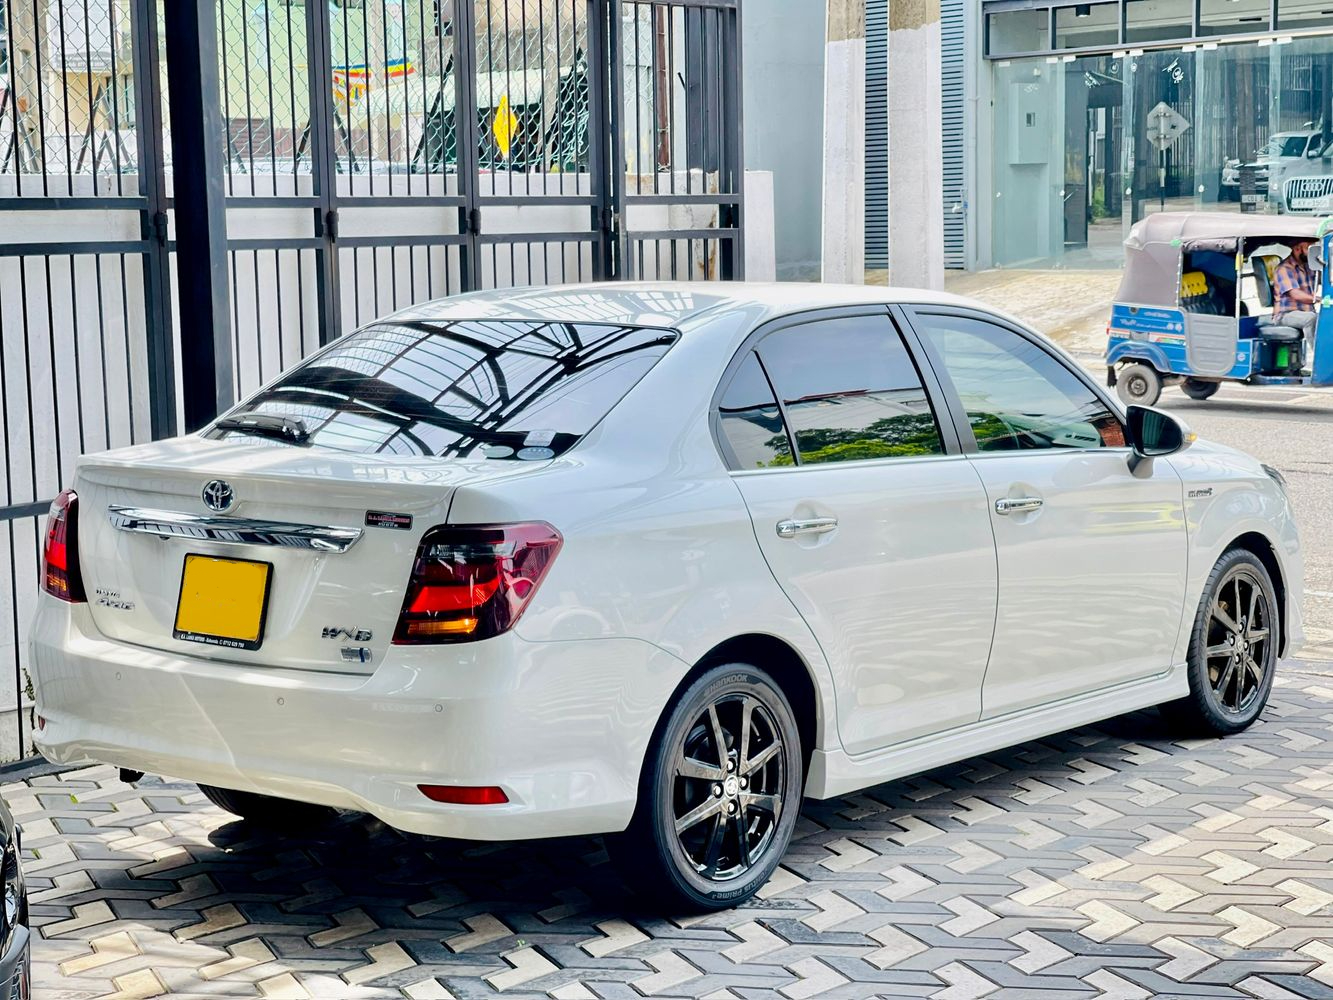 Toyota Axio rear + side view